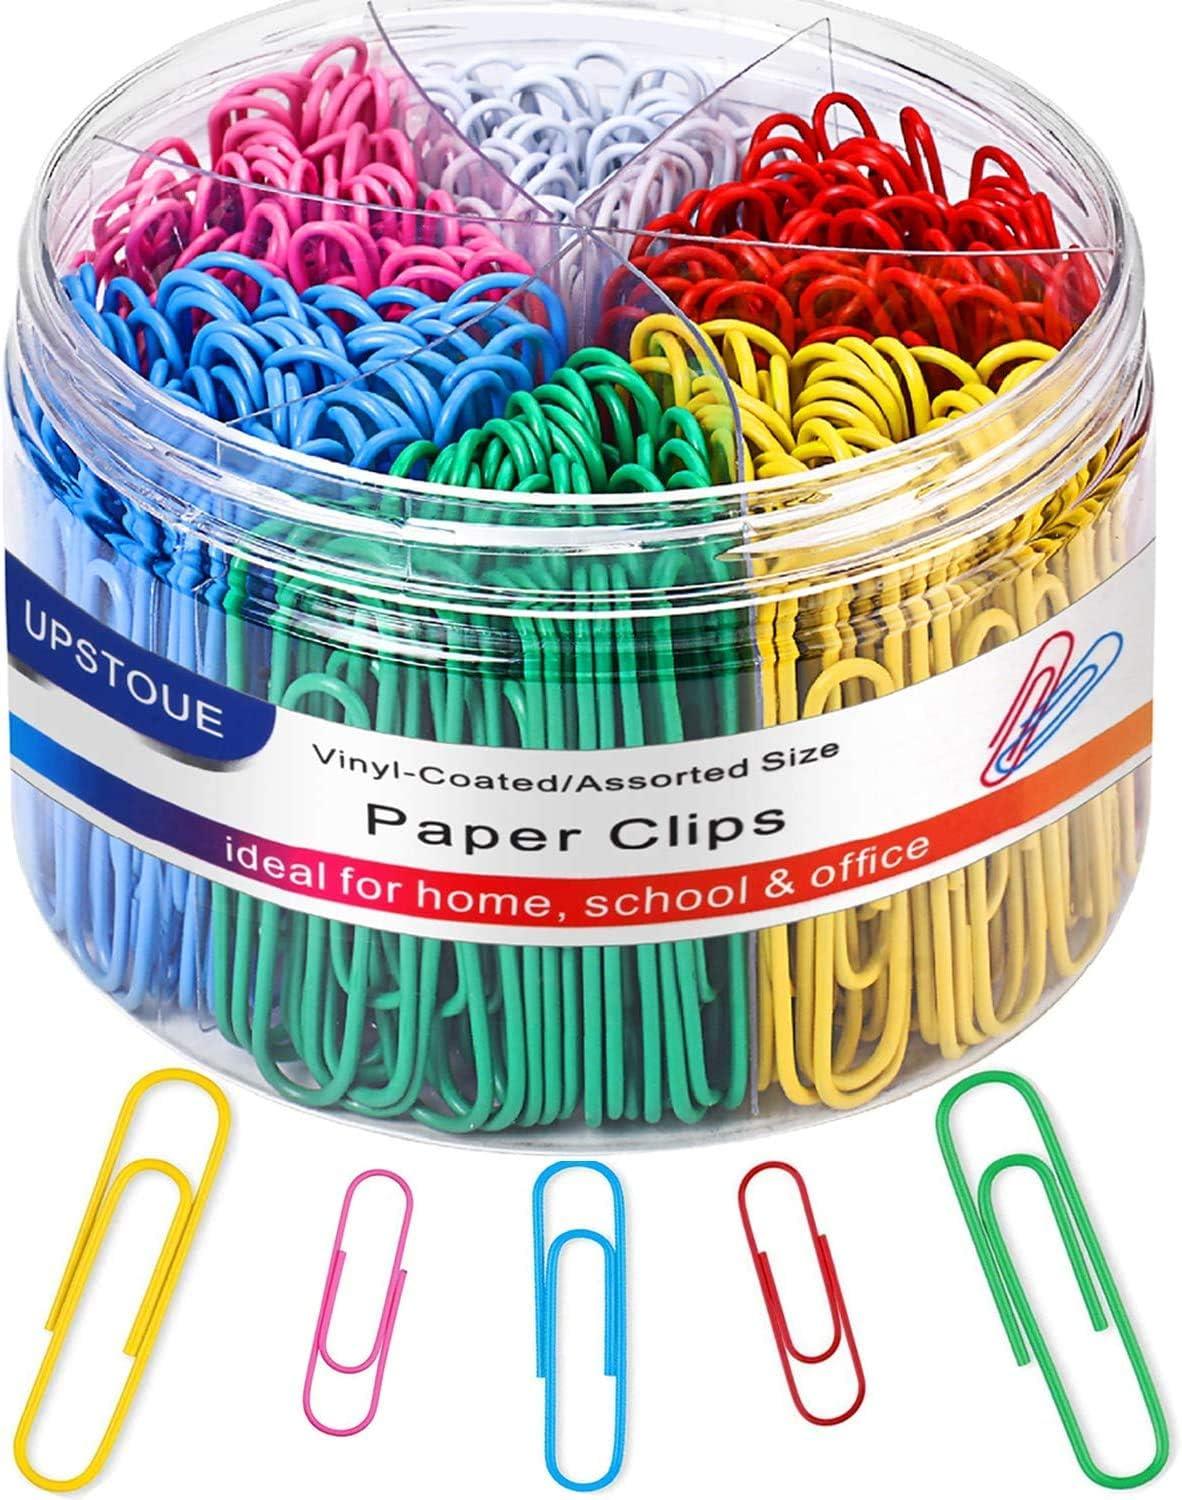 vinaco paper clips colorful medium and jumbo 1 3 inch and 2 inch paper clips durable and rustproof coated